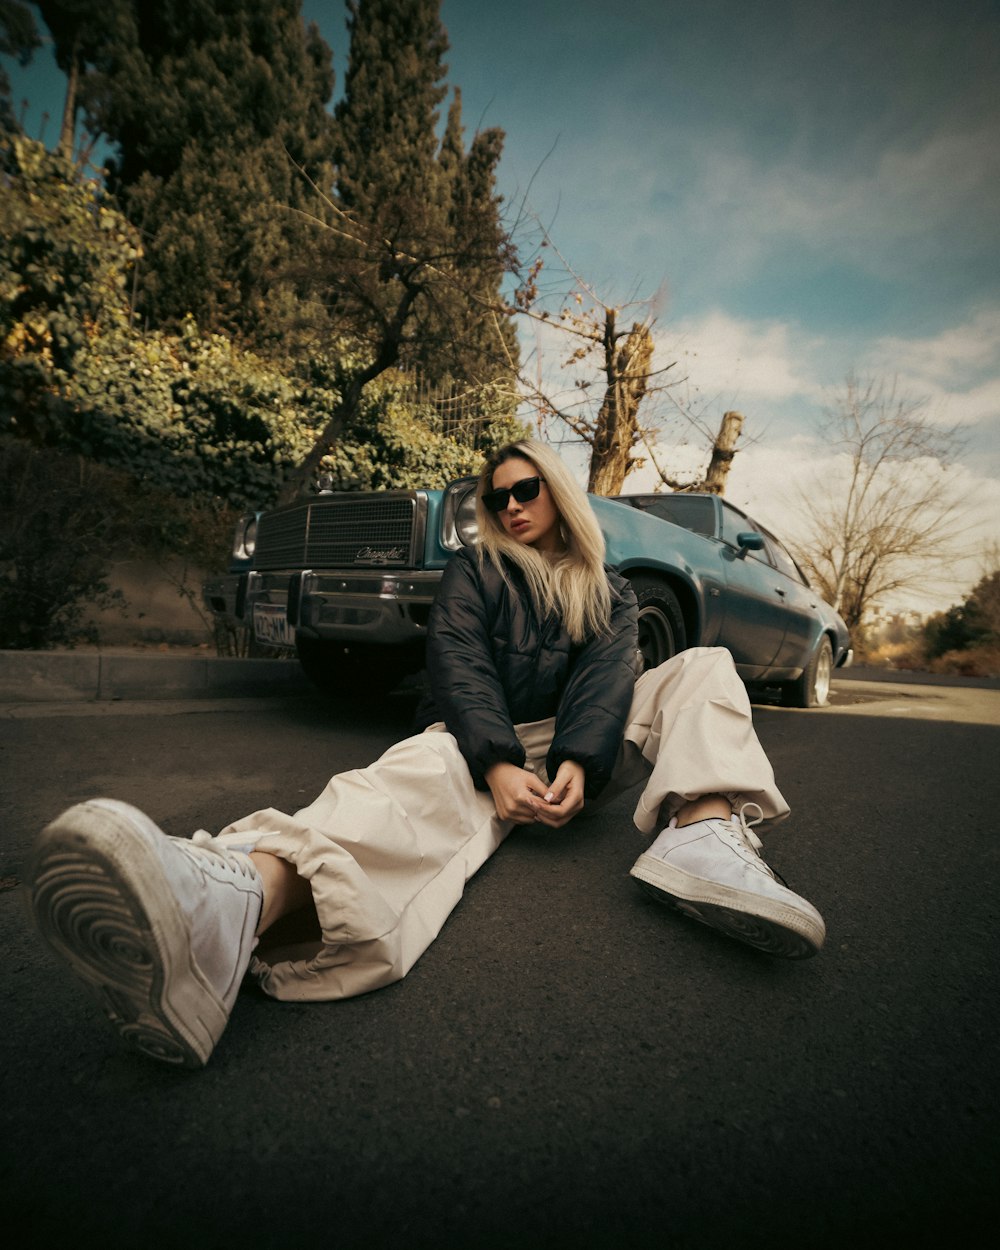 a woman sitting on the ground next to a car